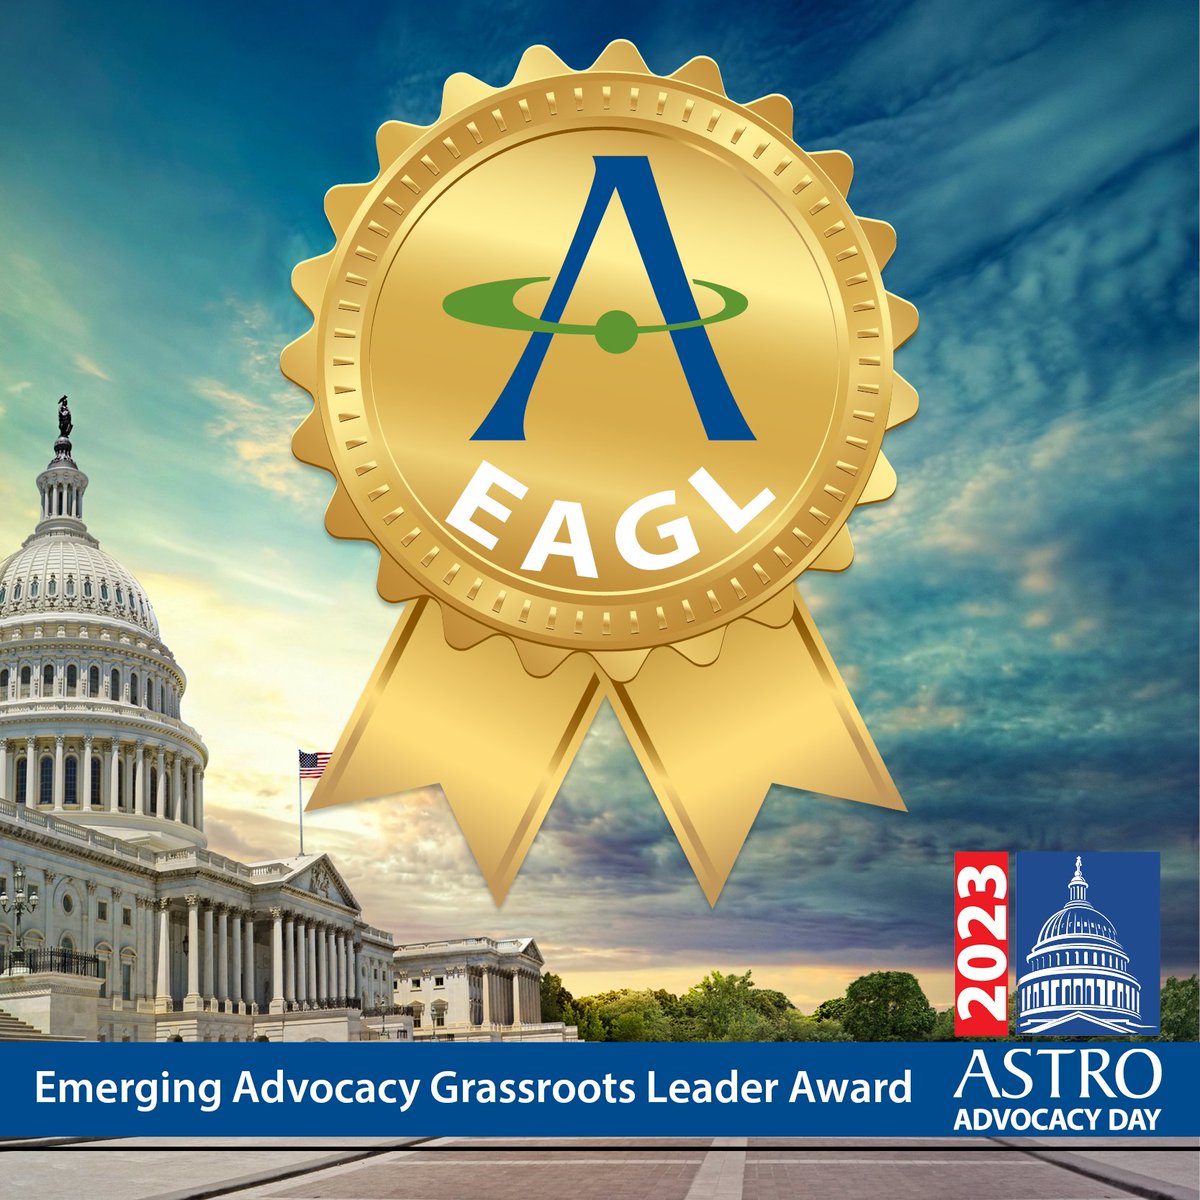 Thank you @ASTRO_org for the #EAGL award to be able to advocate for our patients & #radoncs to ask Congress to:

1️⃣ #StopTheCuts to Medicare 
2⃣#FixPriorAuth
3⃣Increase $$ for #cancer research @NIH @theNCI @ARPA_H (including #climatehealth & #equity research 🌱) #CancerAdvocacy